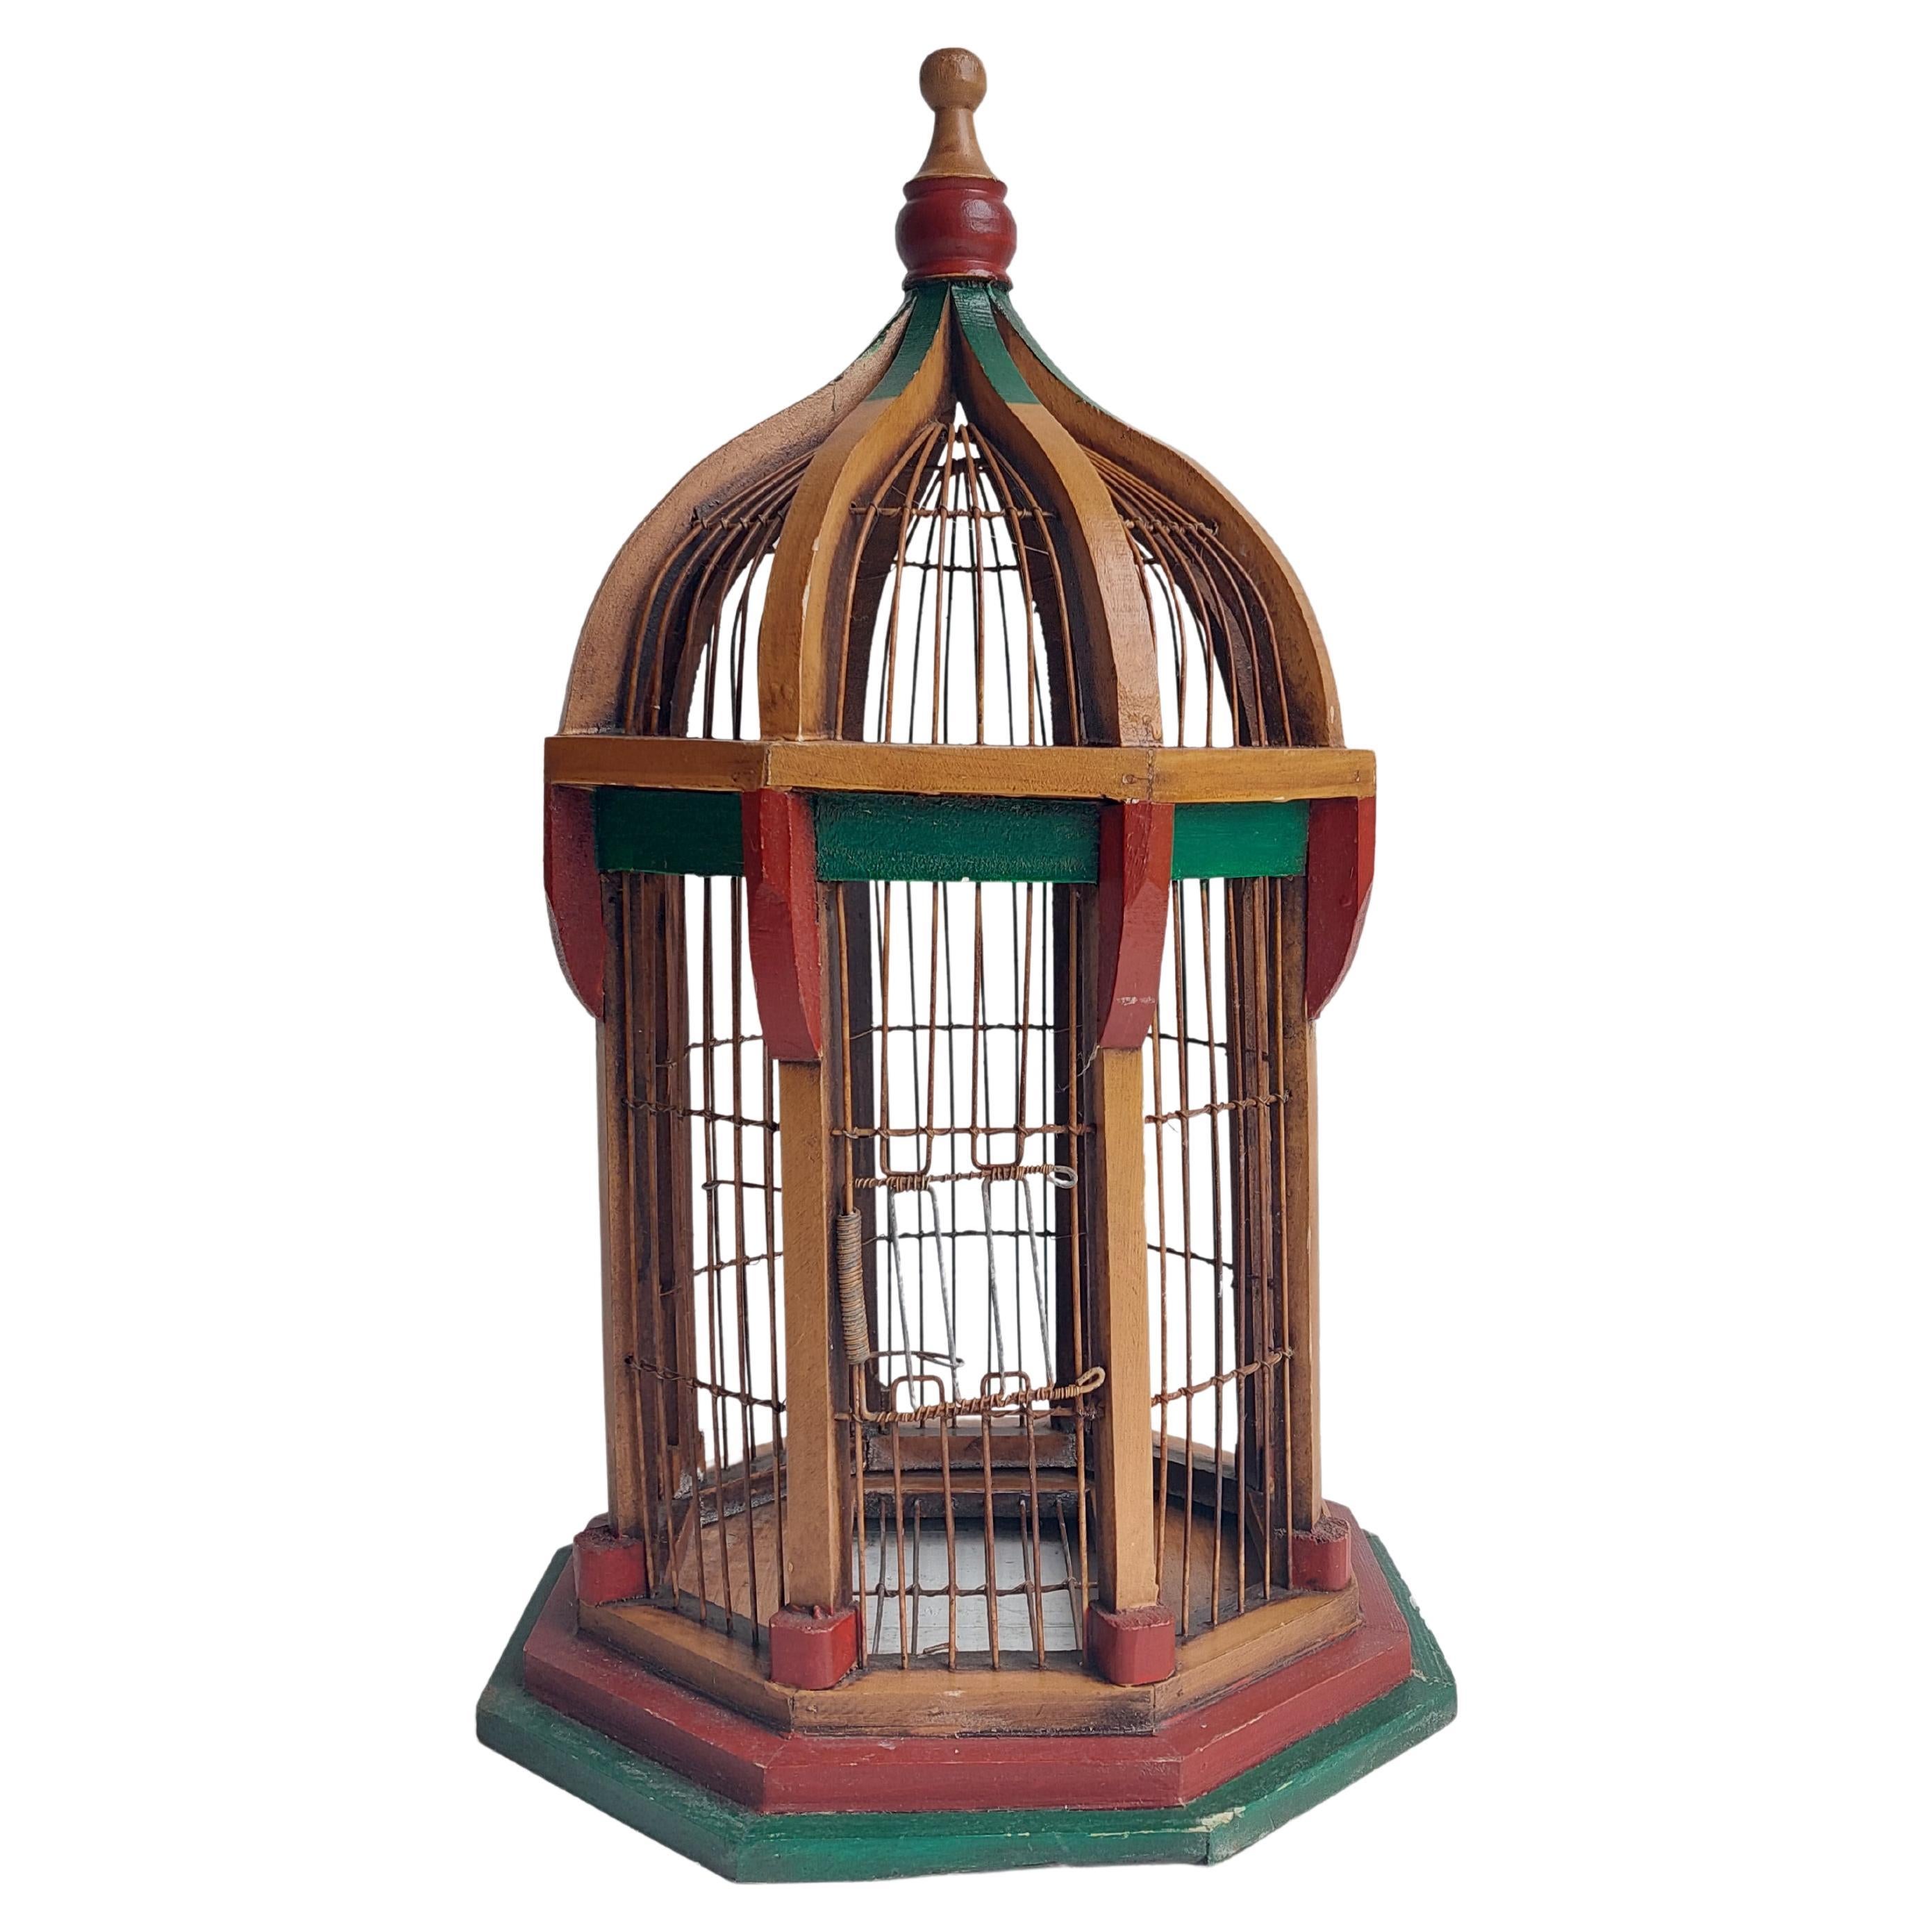 Antique  Architectural Dome Painted Bird Cage, Victorian Style